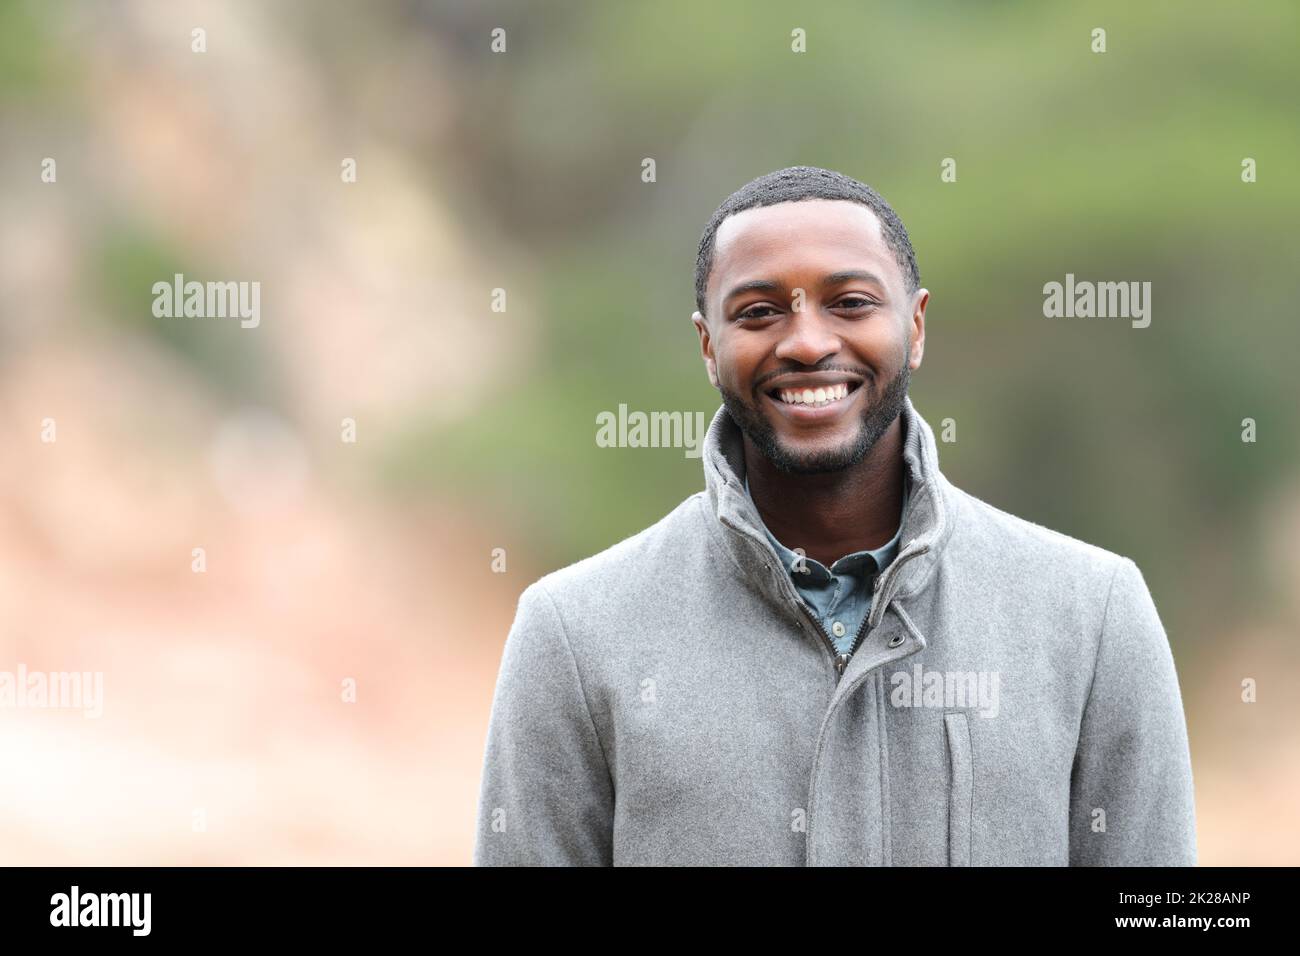 Happy man with black skin looks at camera outdoors in winter Stock Photo